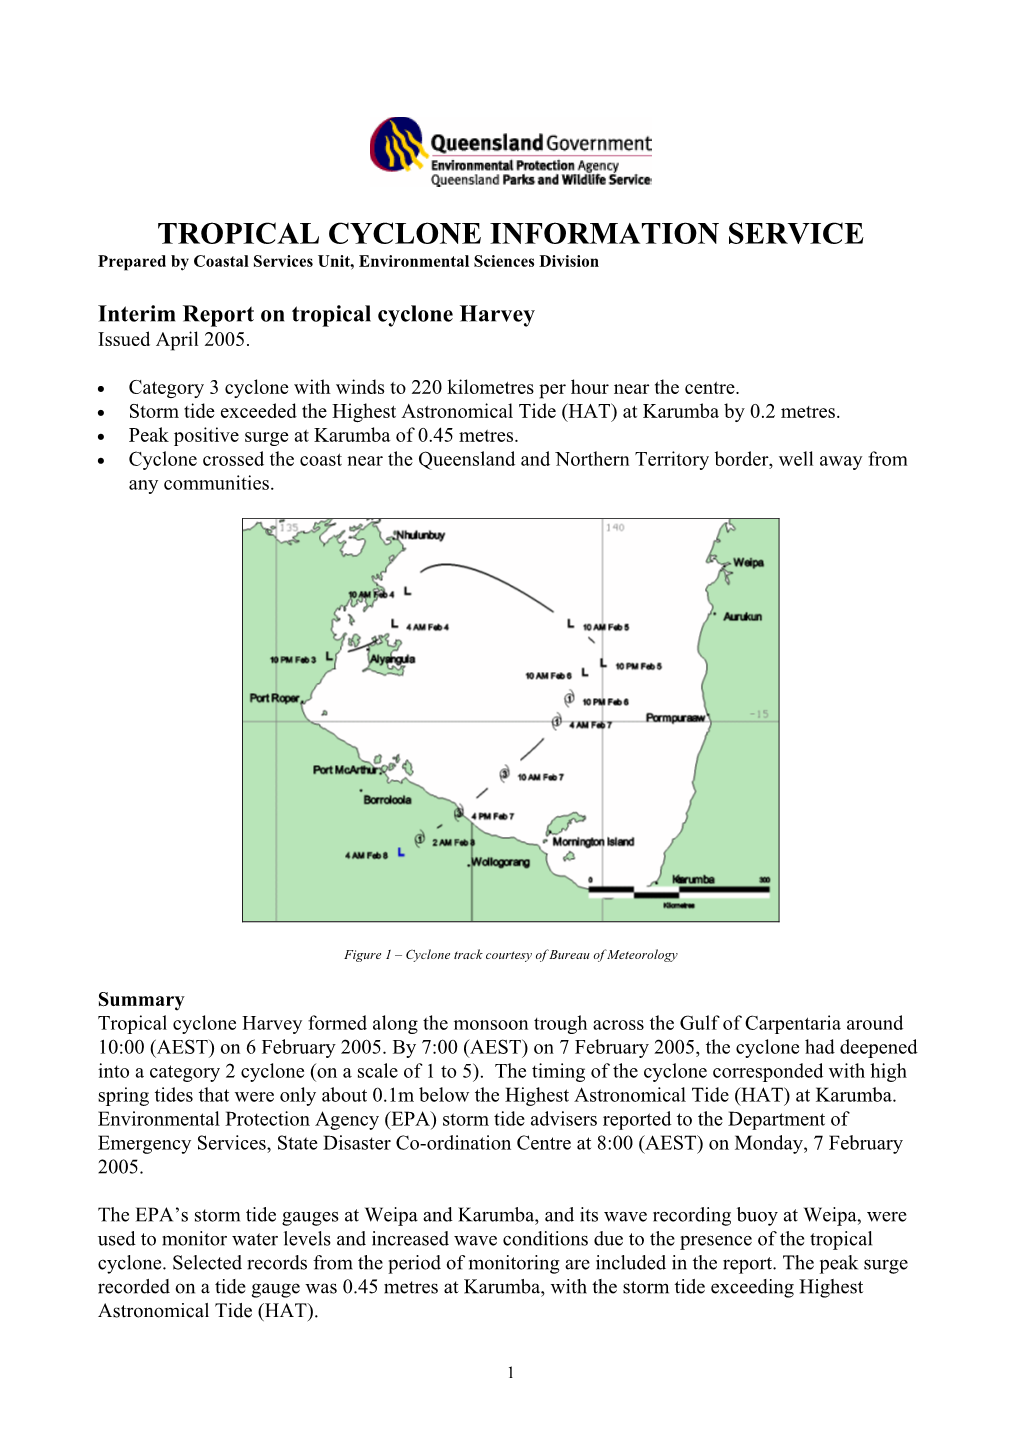 Interim Report on Tropical Cyclone Harvey Issued April 2005